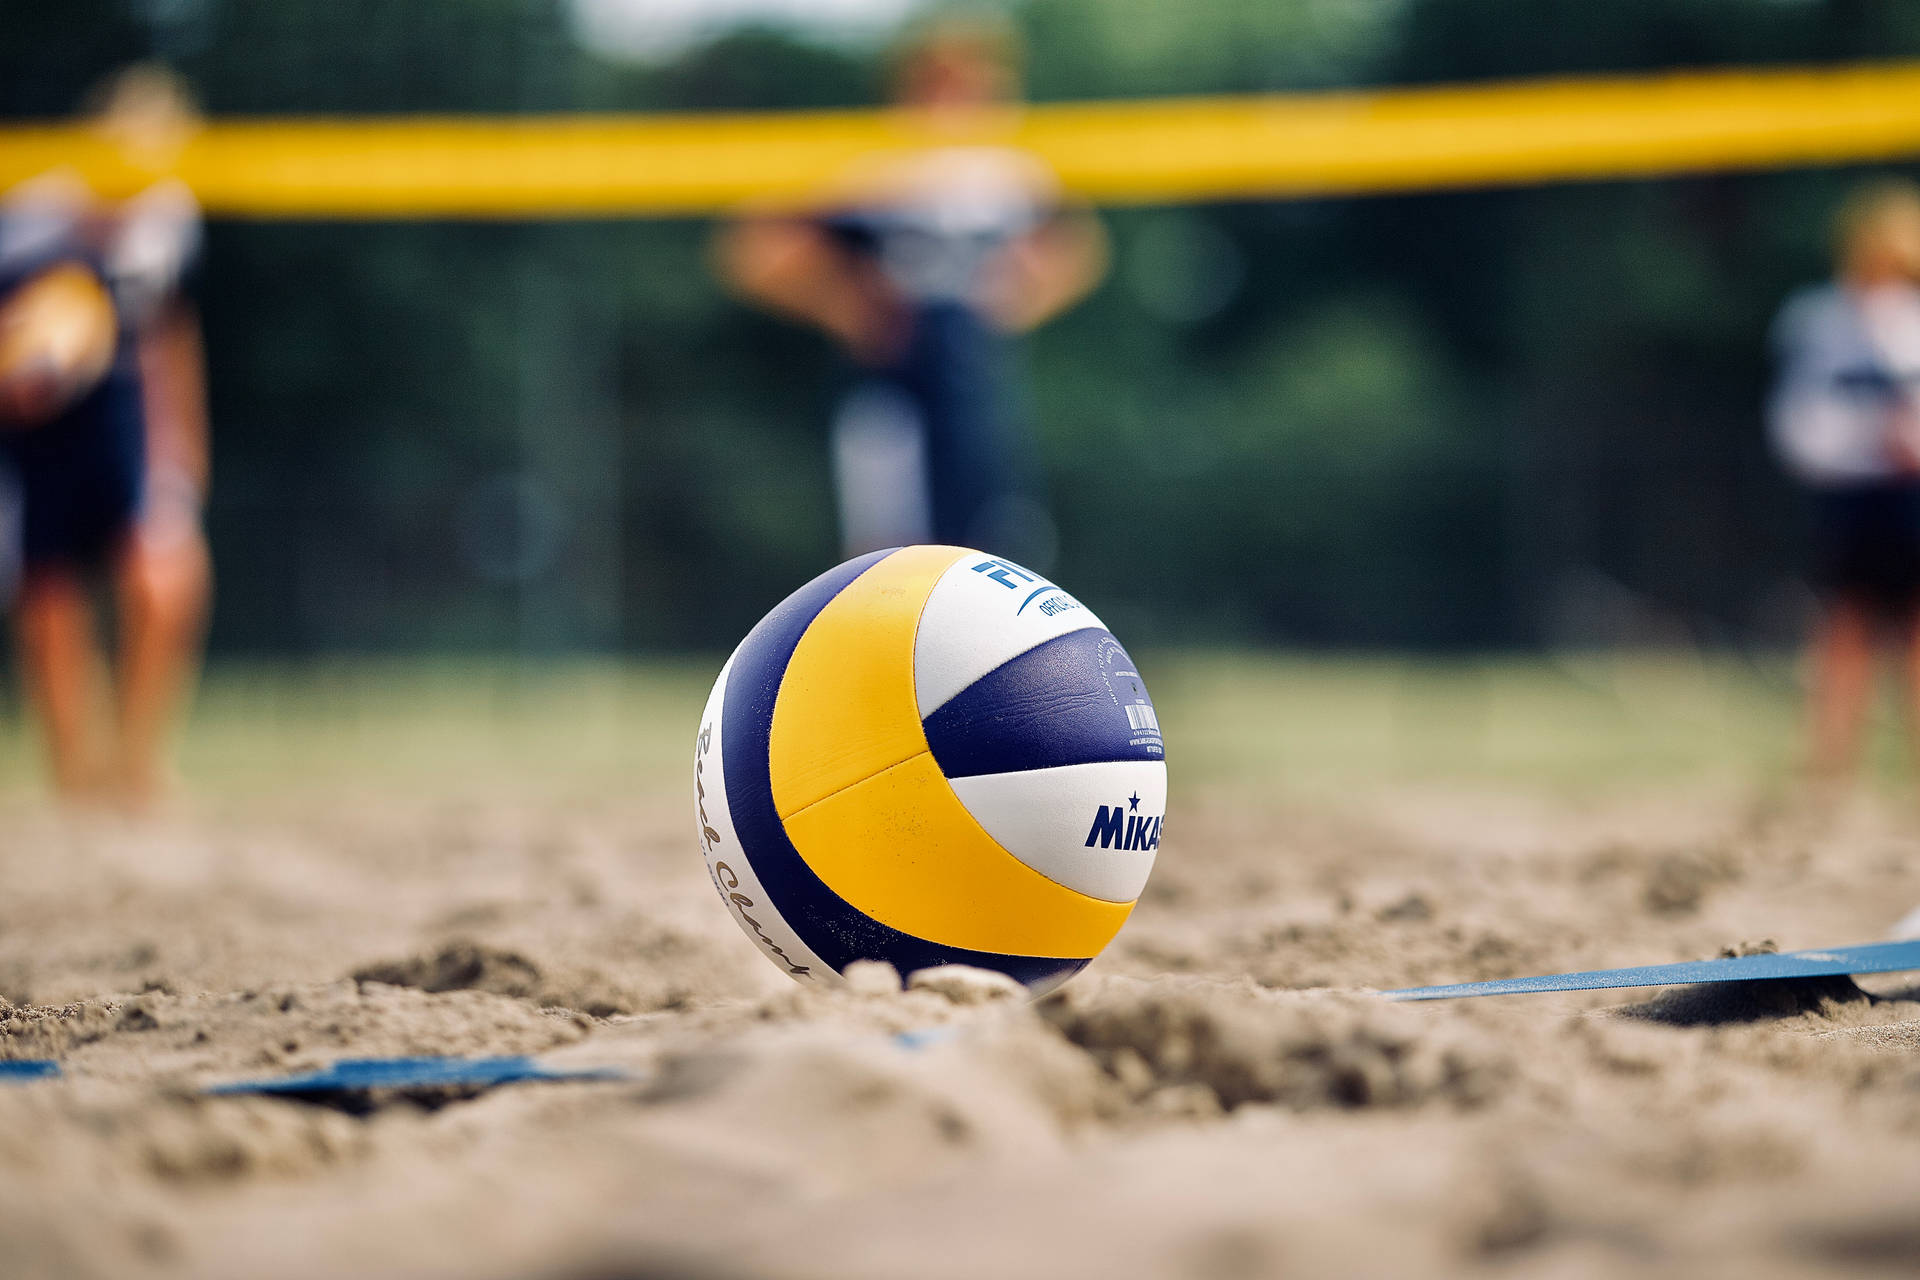 6240X4160 Volleyball Wallpaper and Background